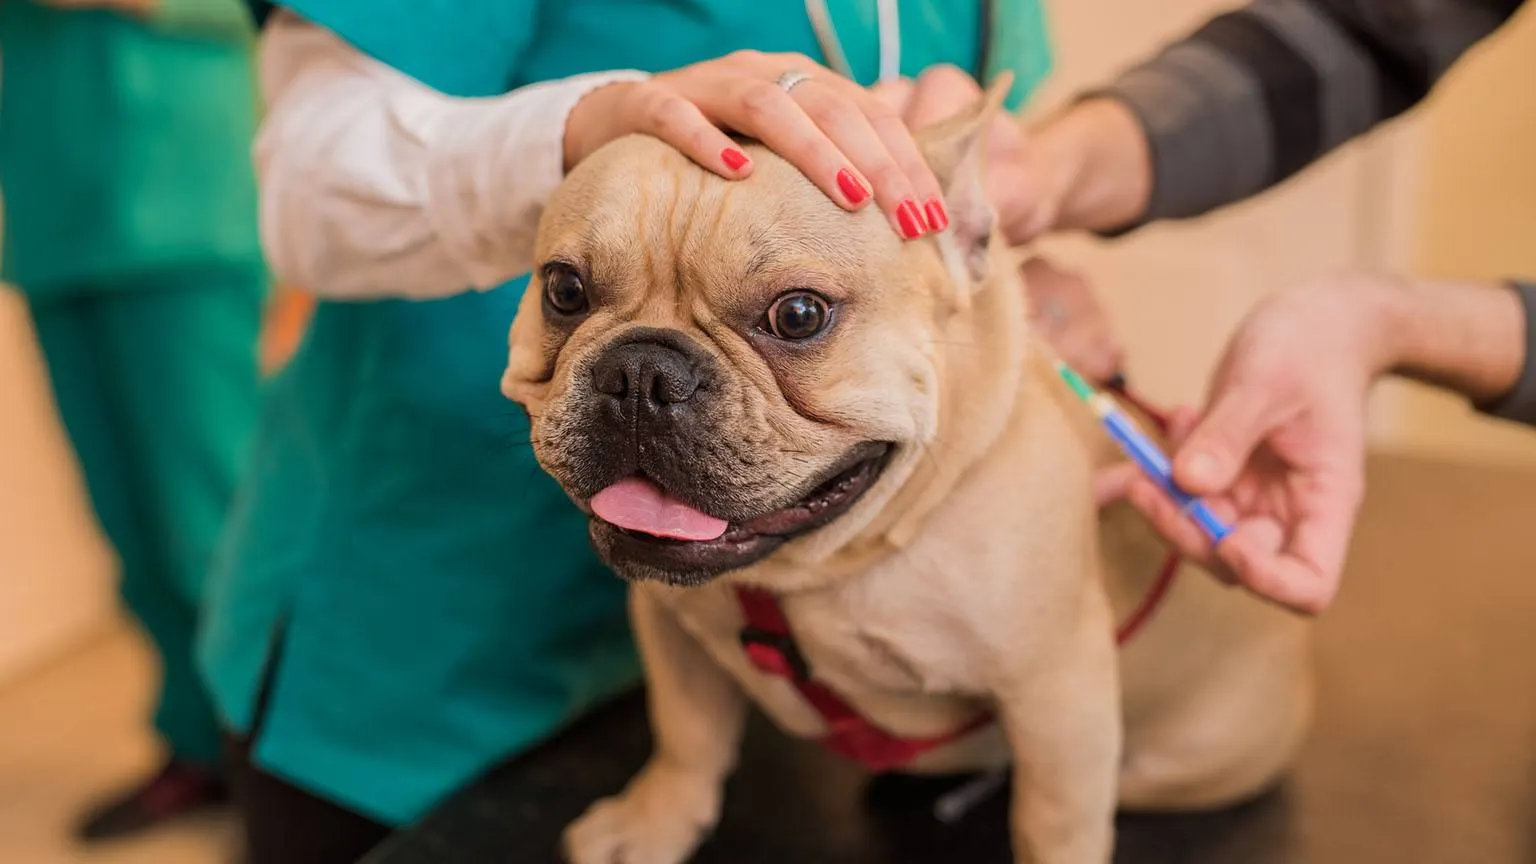 Vaccinating Bulldog GettyImages 1536x864 